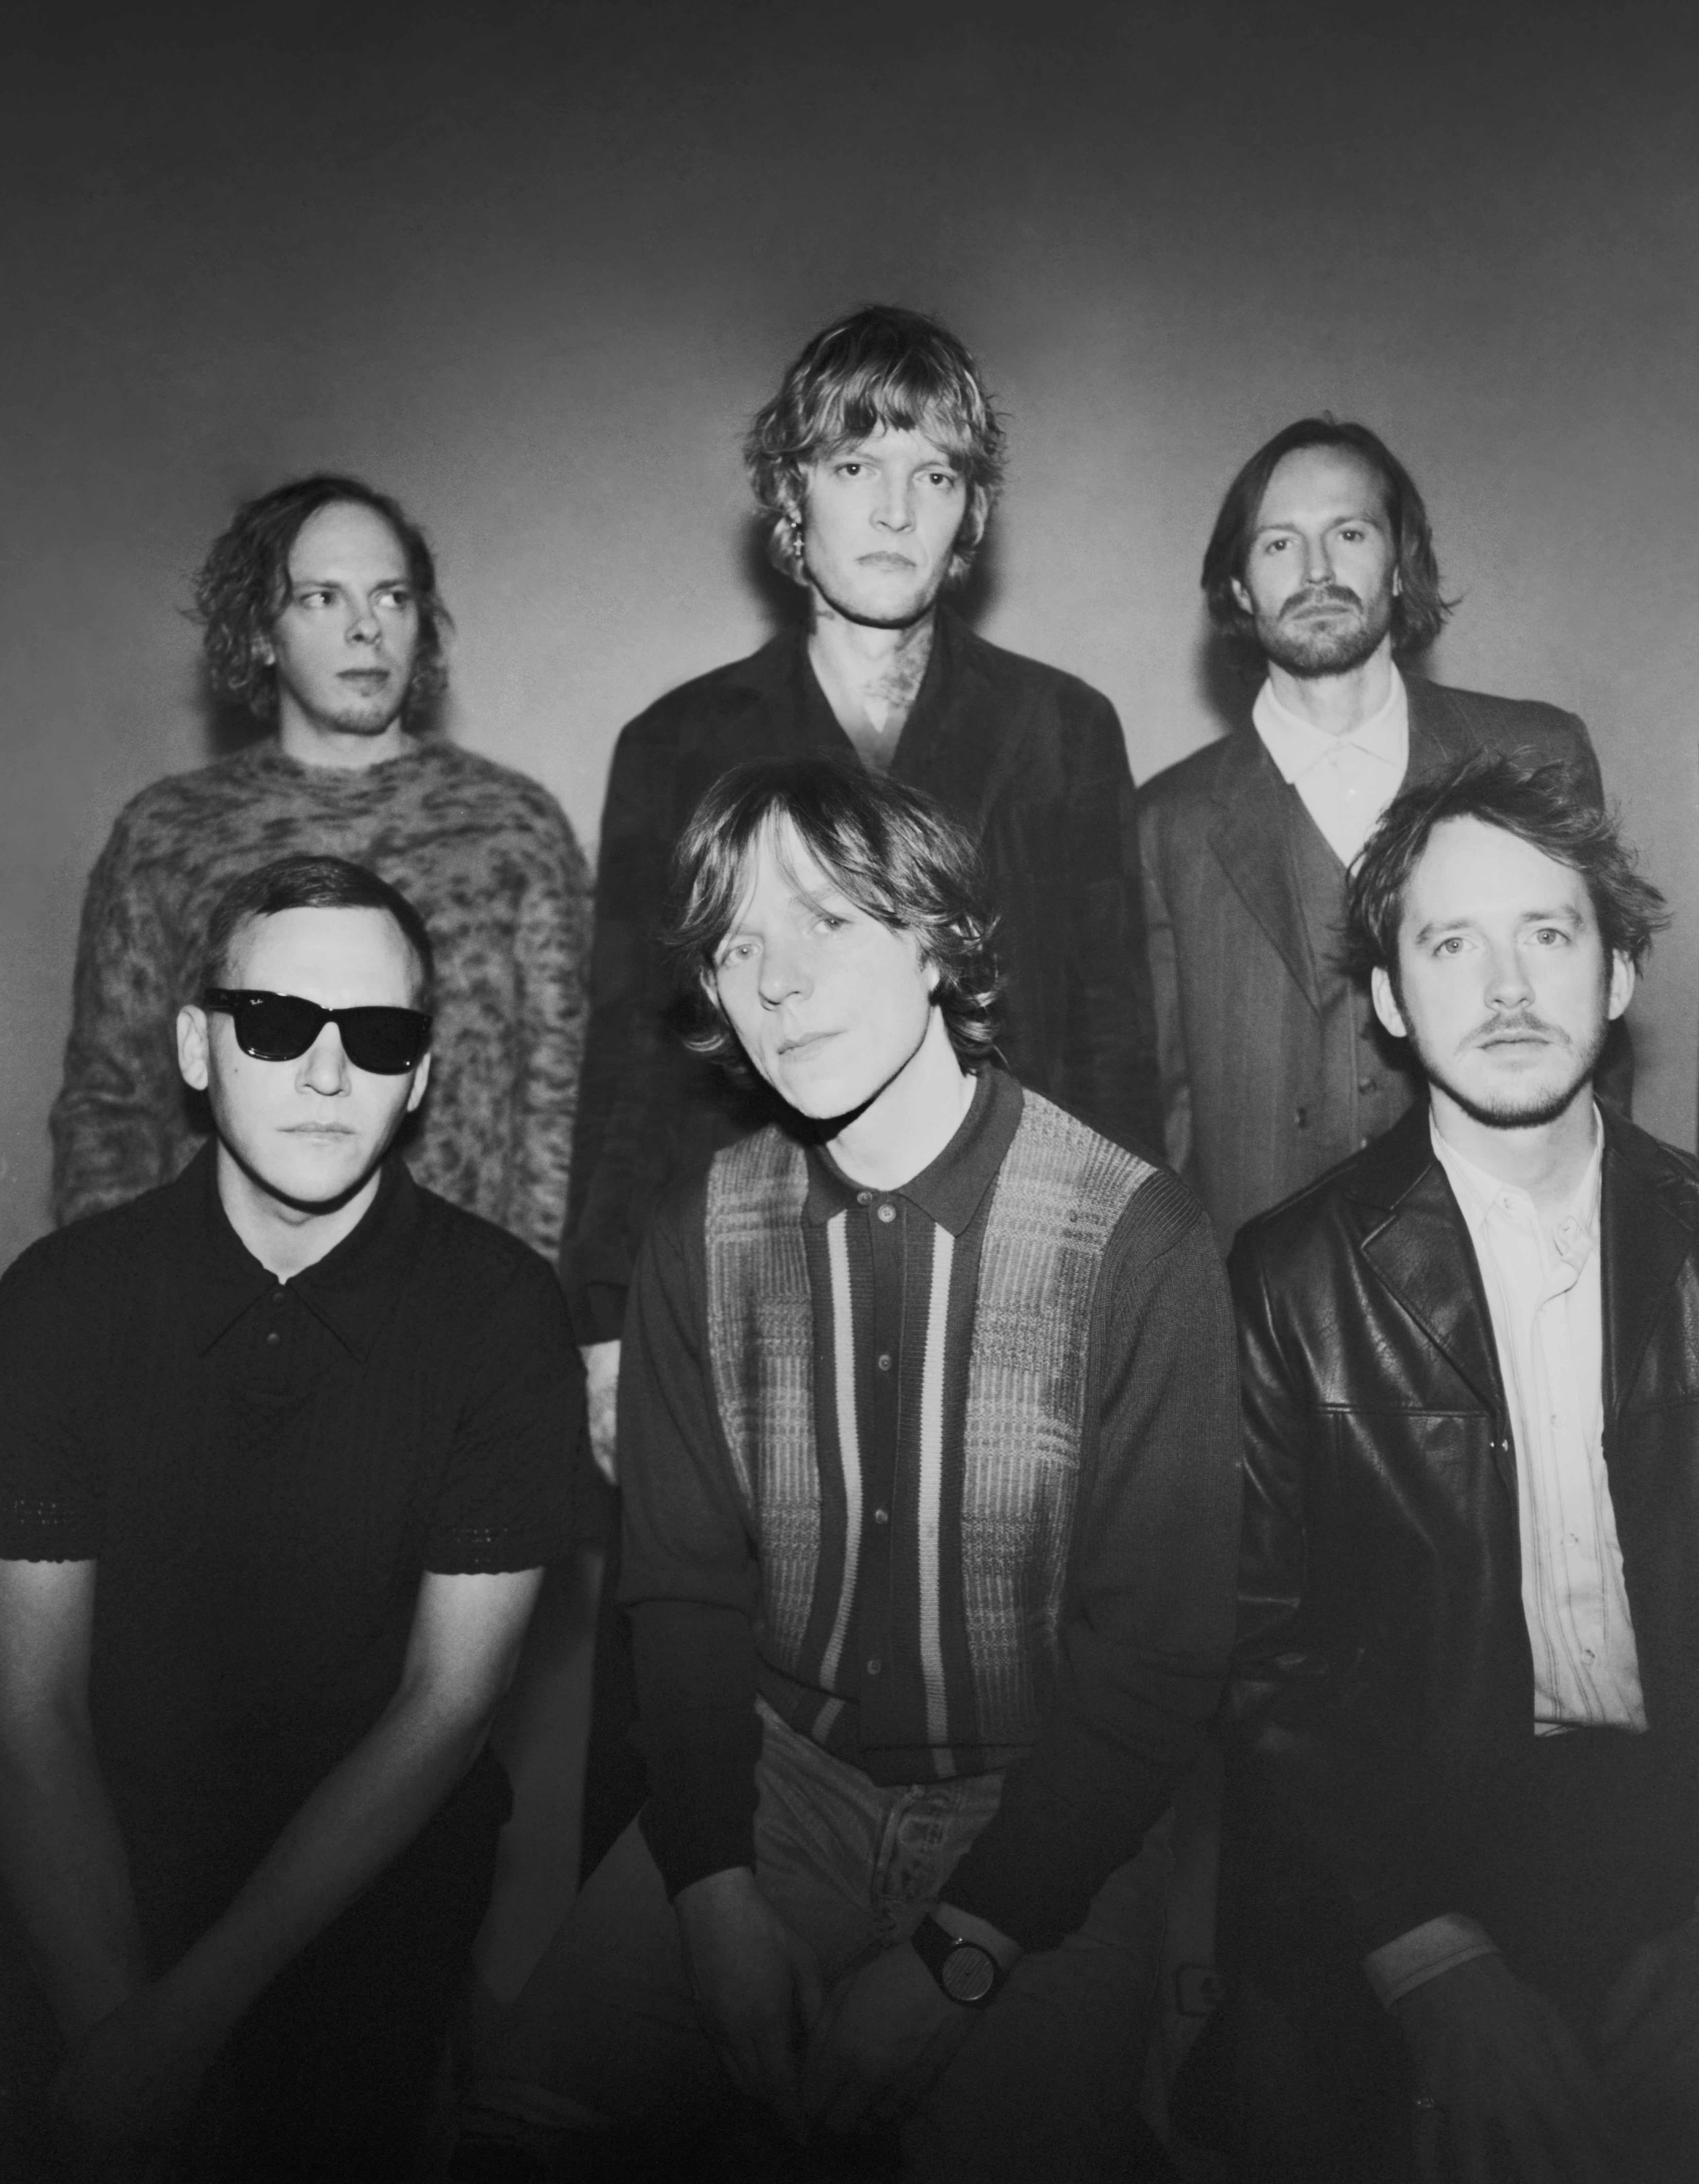 cage-the-elephant-radio-listen-to-free-music-get-the-latest-info